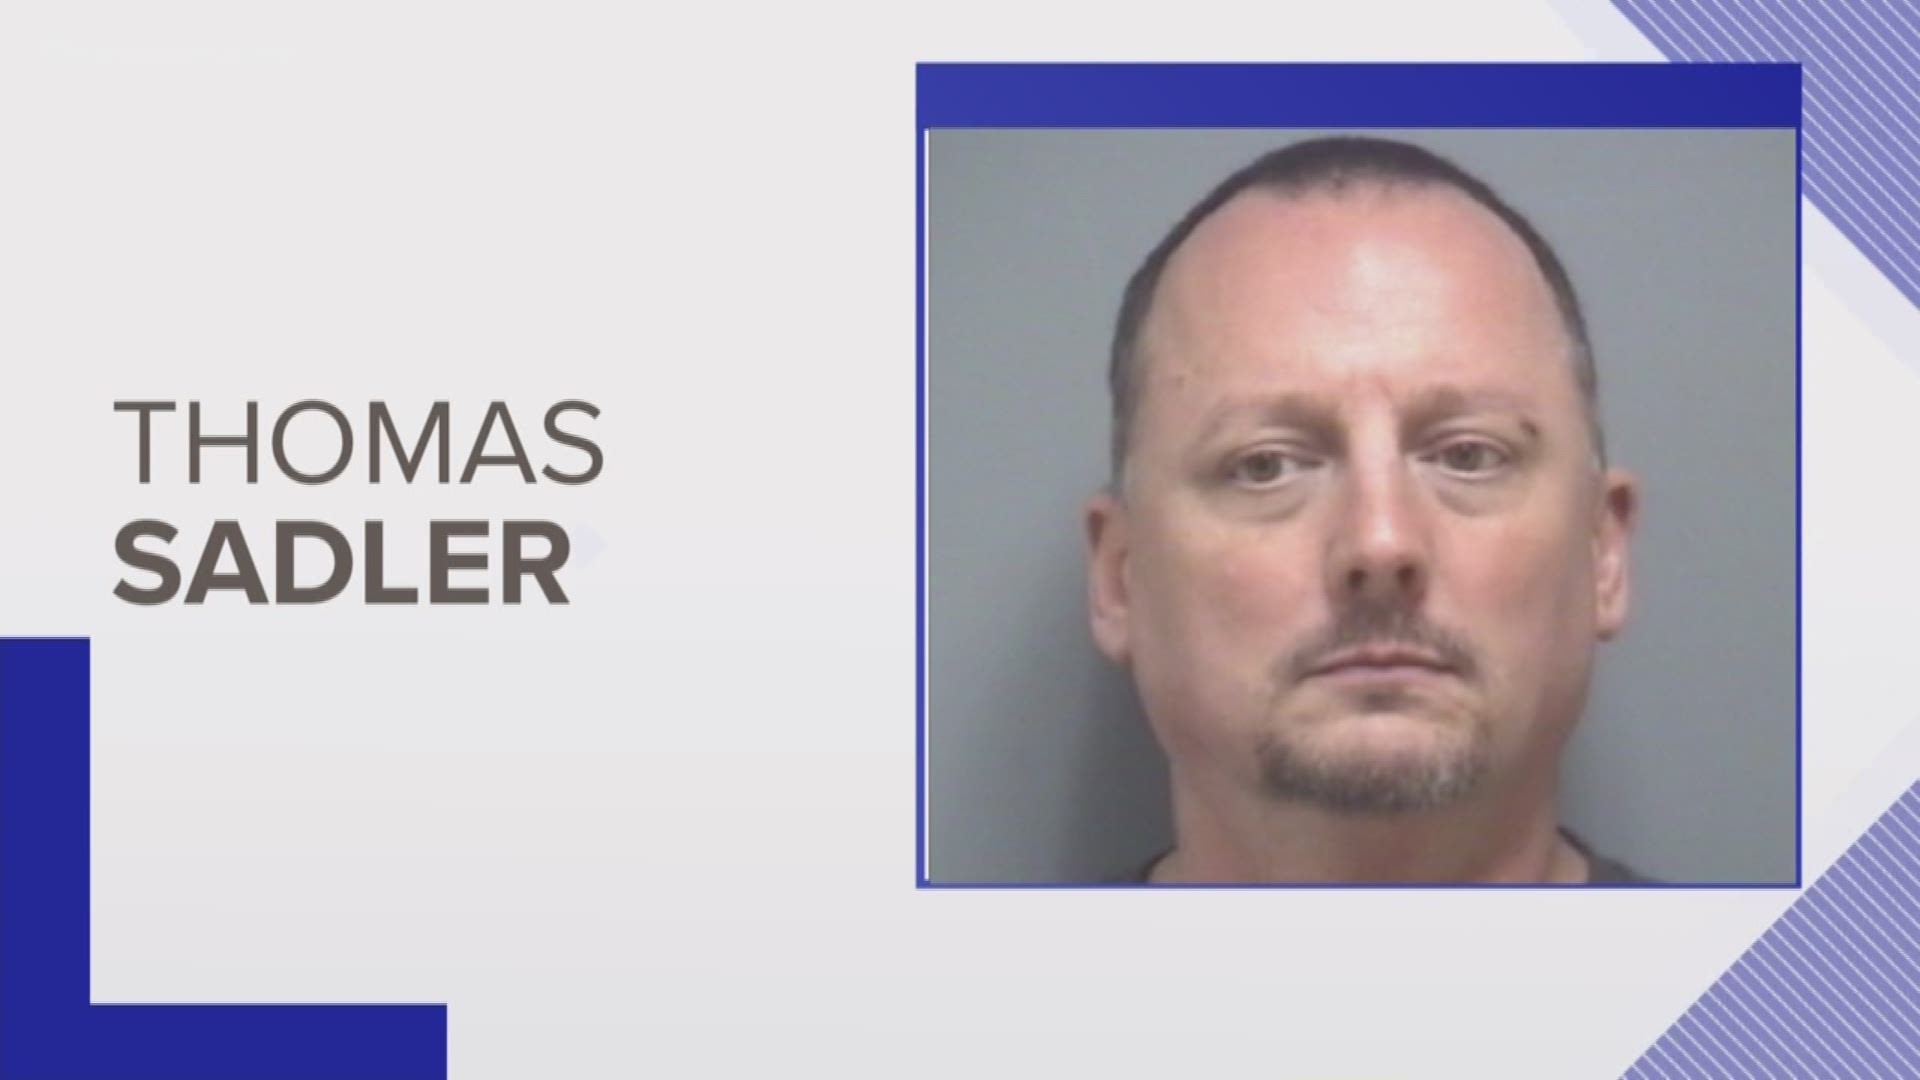 Thomas Sadler has pleaded guilty to charges of child porn and molestation.